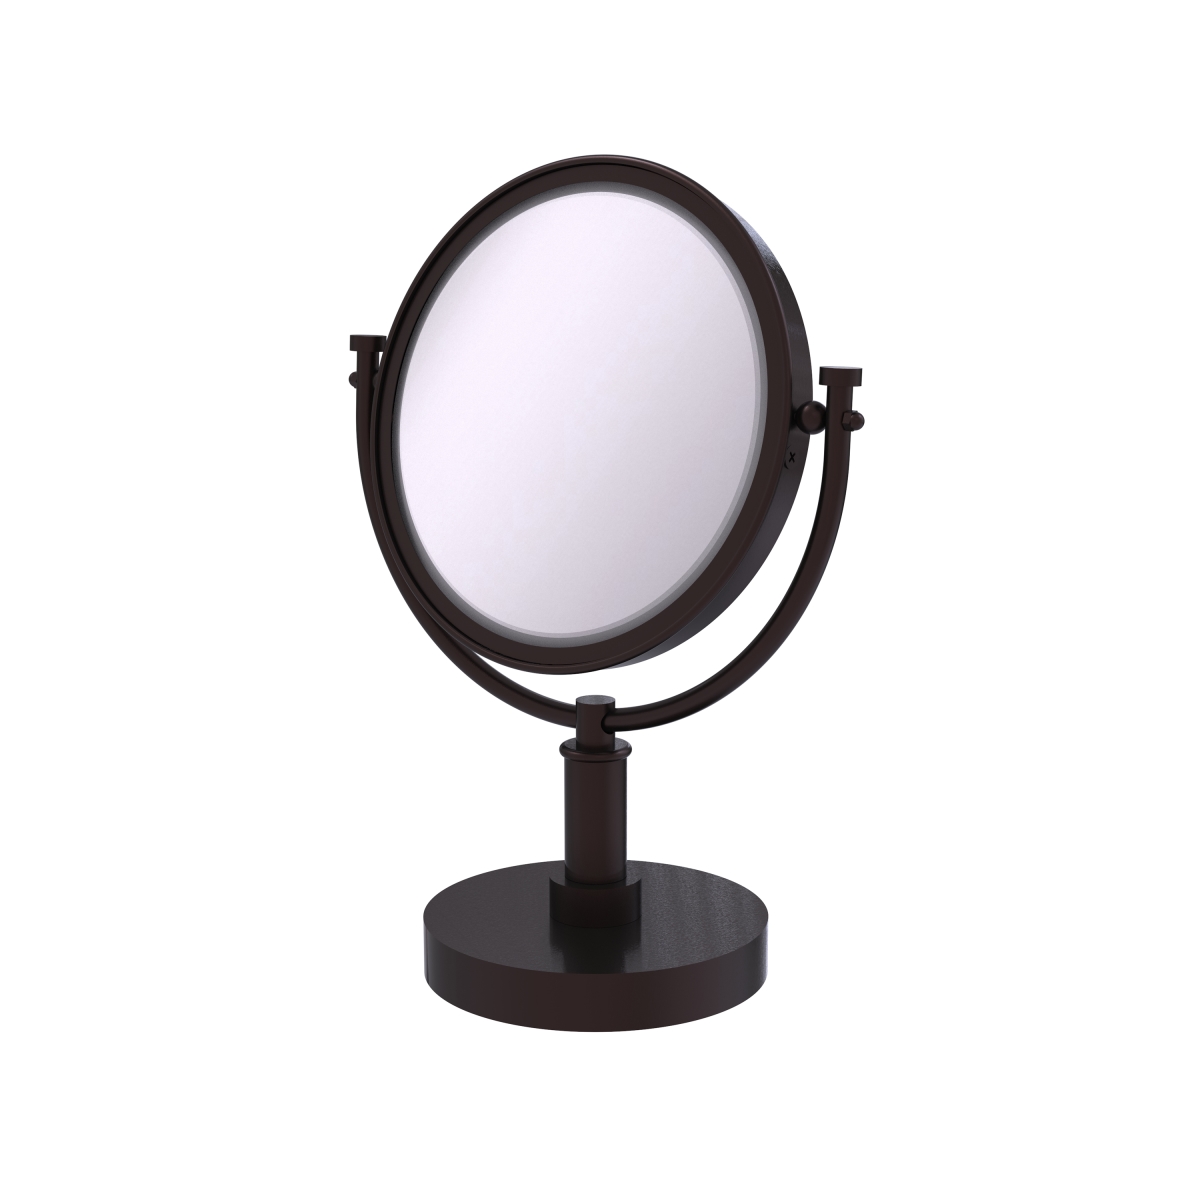 Dm-4-3x-abz Smooth Ring Style 8 In. Vanity Top Make-up Mirror 3x Magnification, Antique Bronze